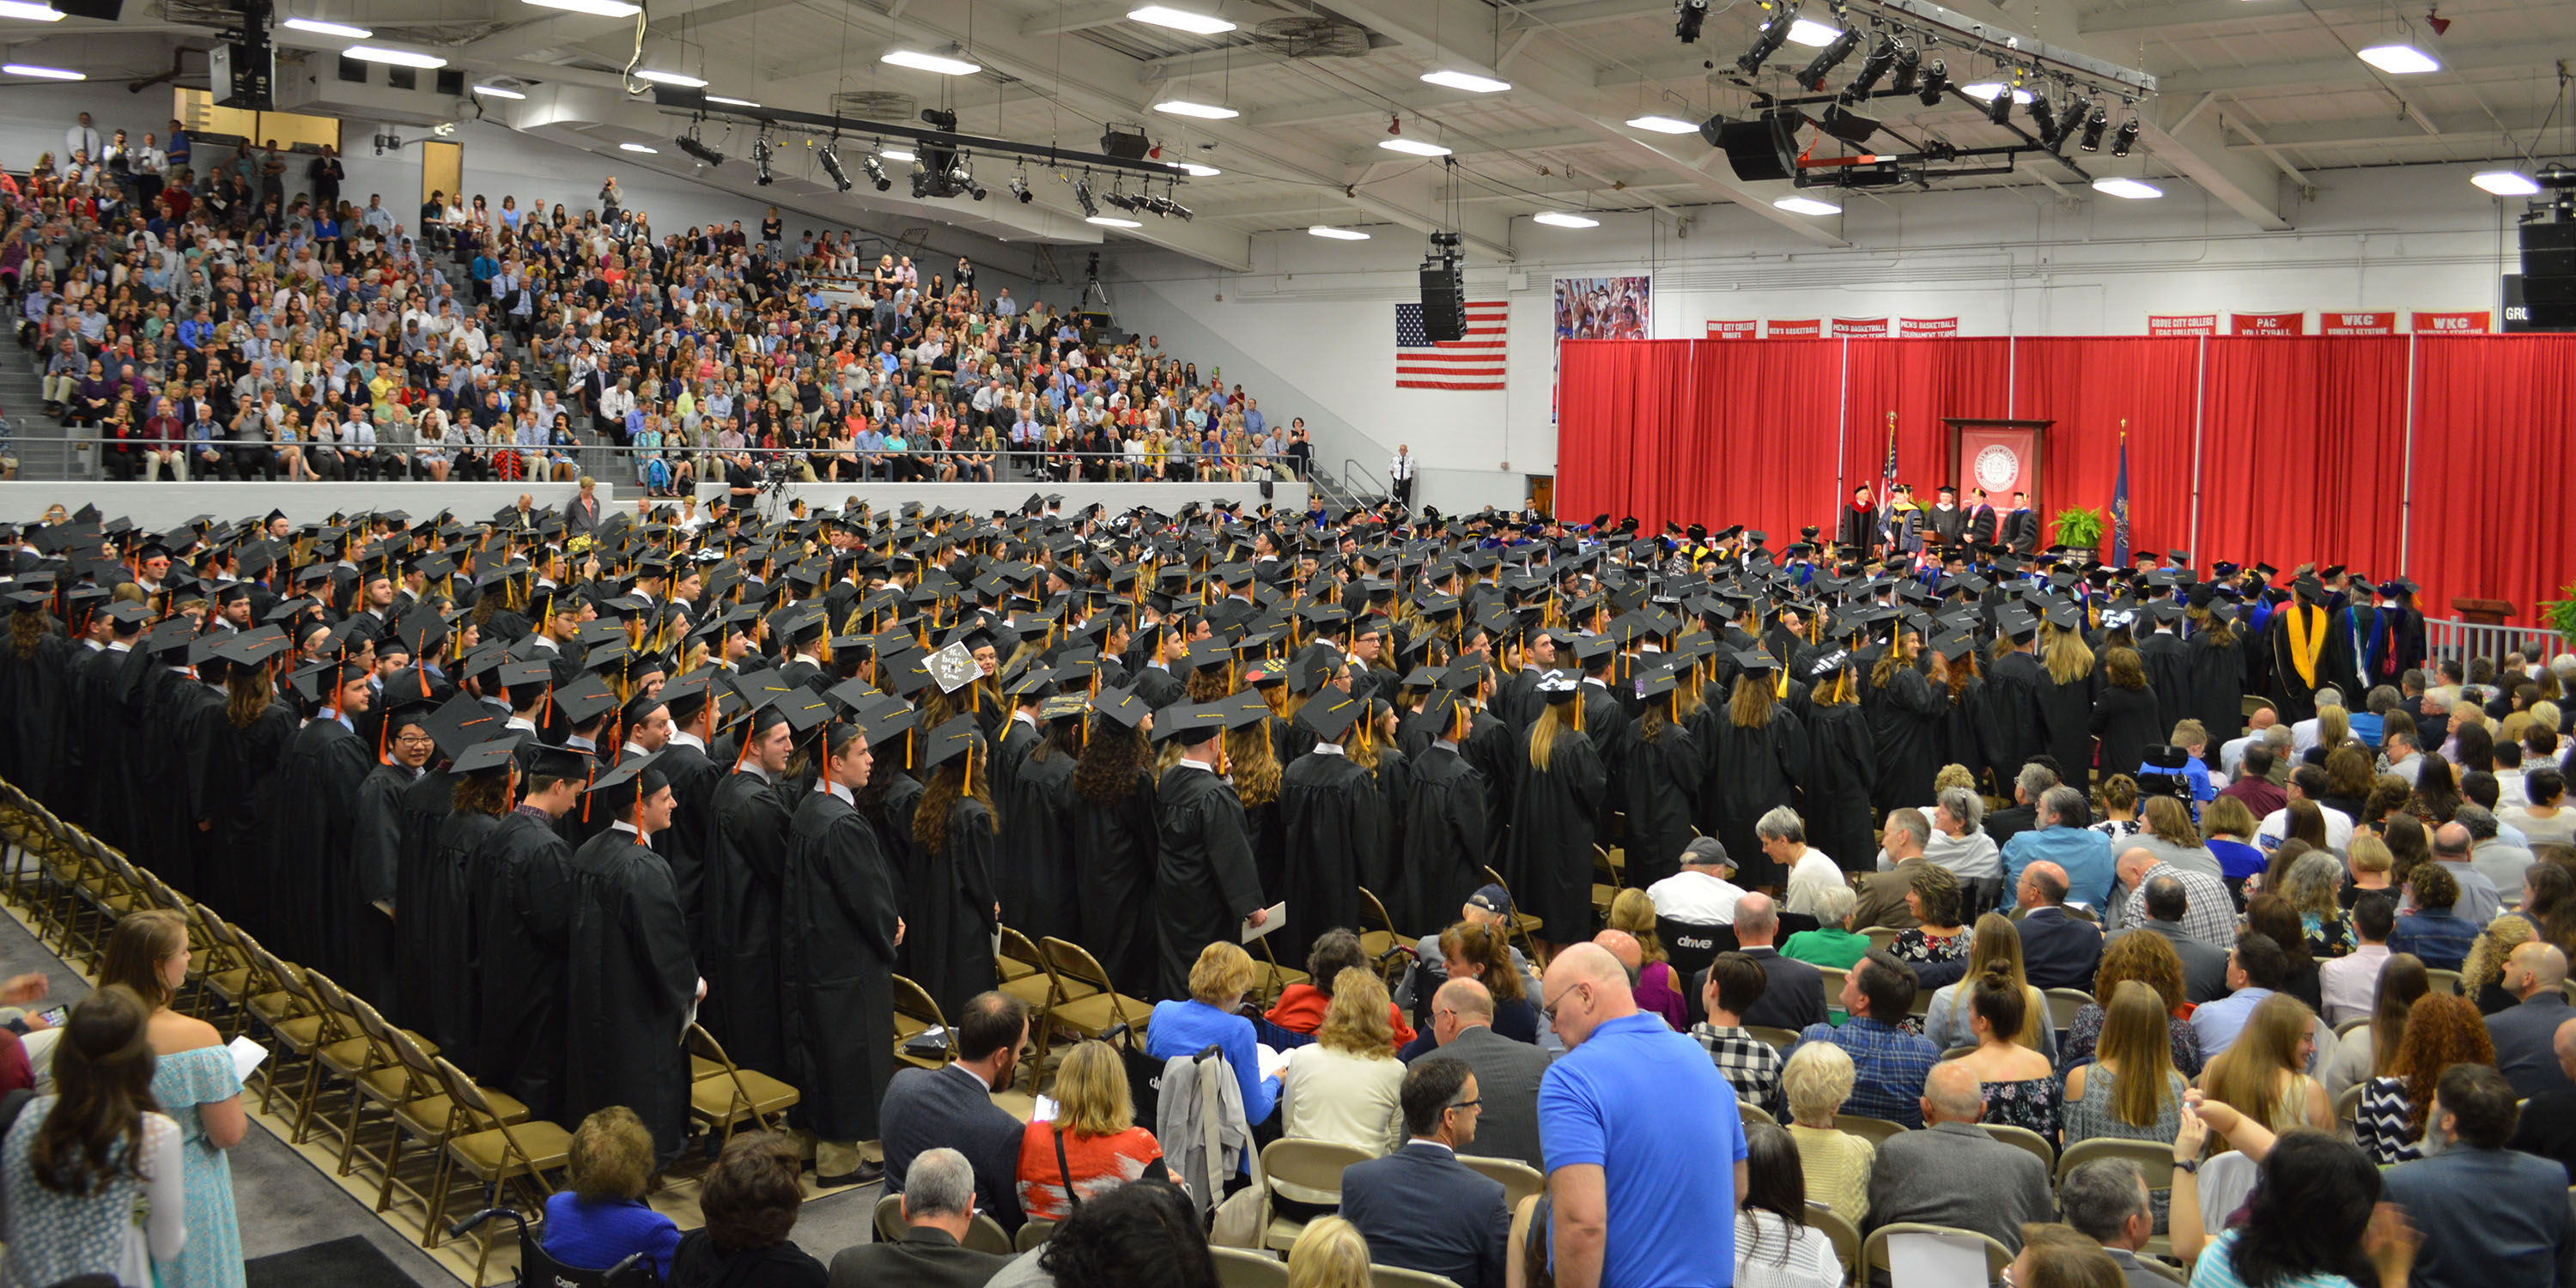 Class of 2018 urged to follow calling, be leaders